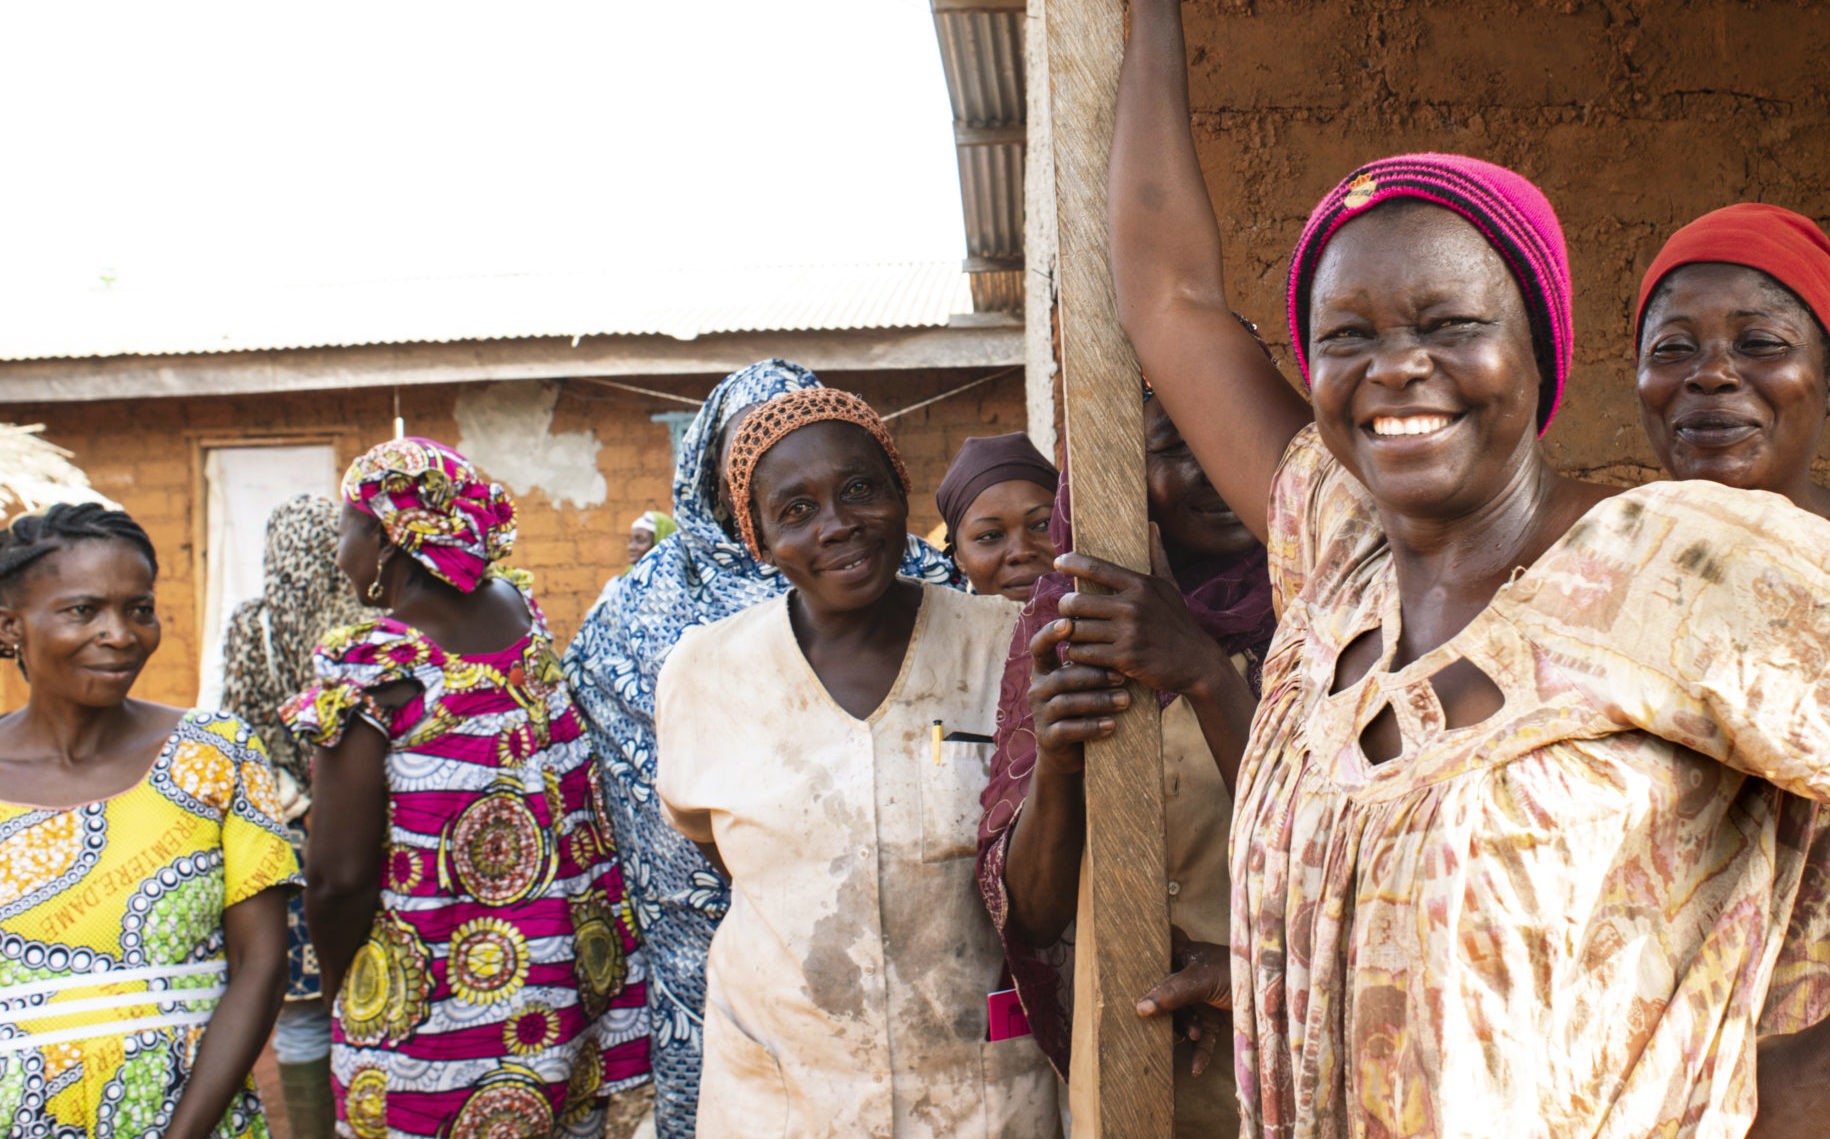 Several women smiling, gathered together, Cameroon. (Cuso International file photo, Cameroon)